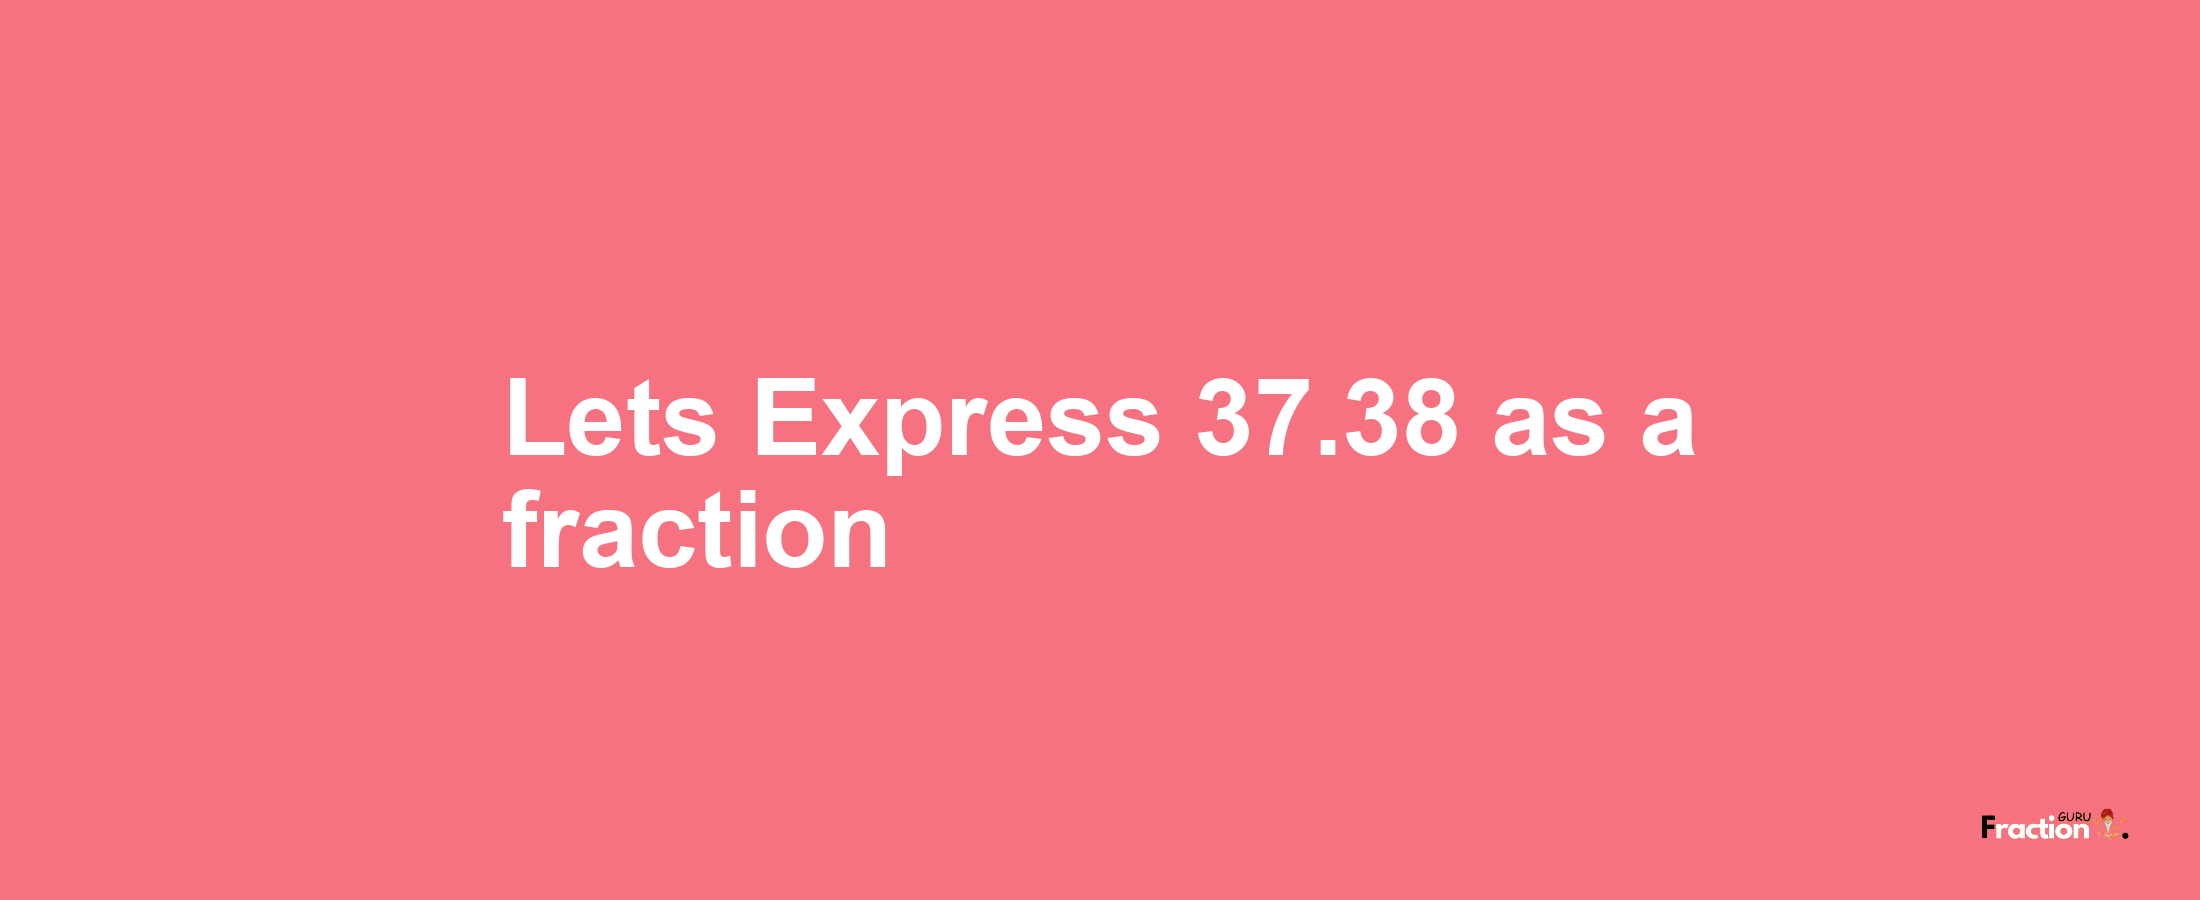 Lets Express 37.38 as afraction